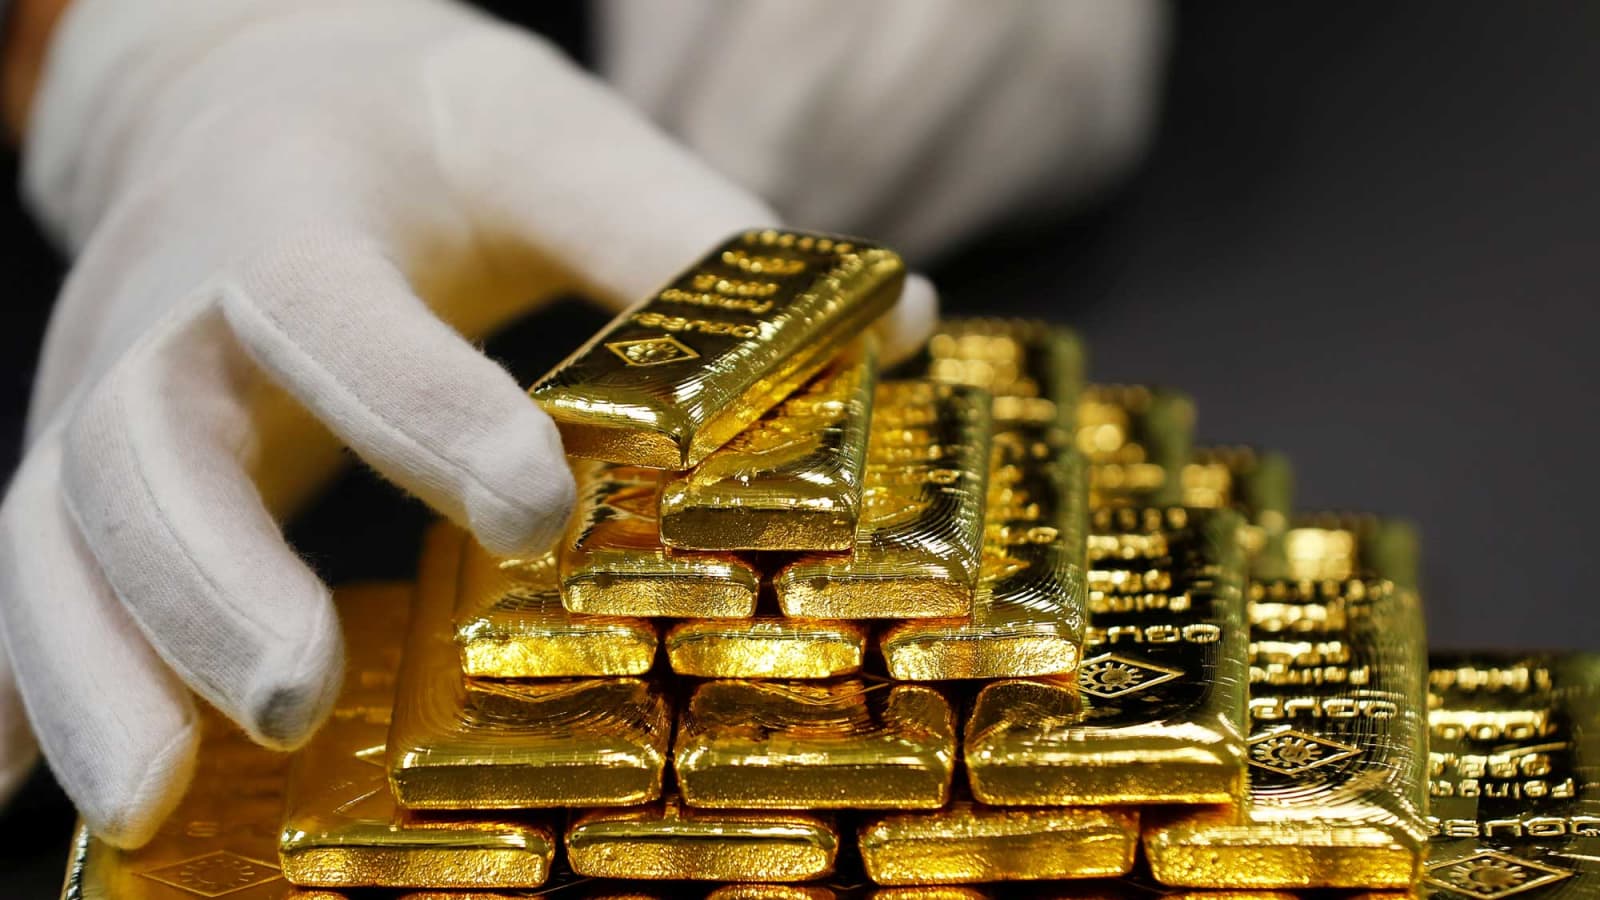 Price of gold reached Rs 92,500 per tola